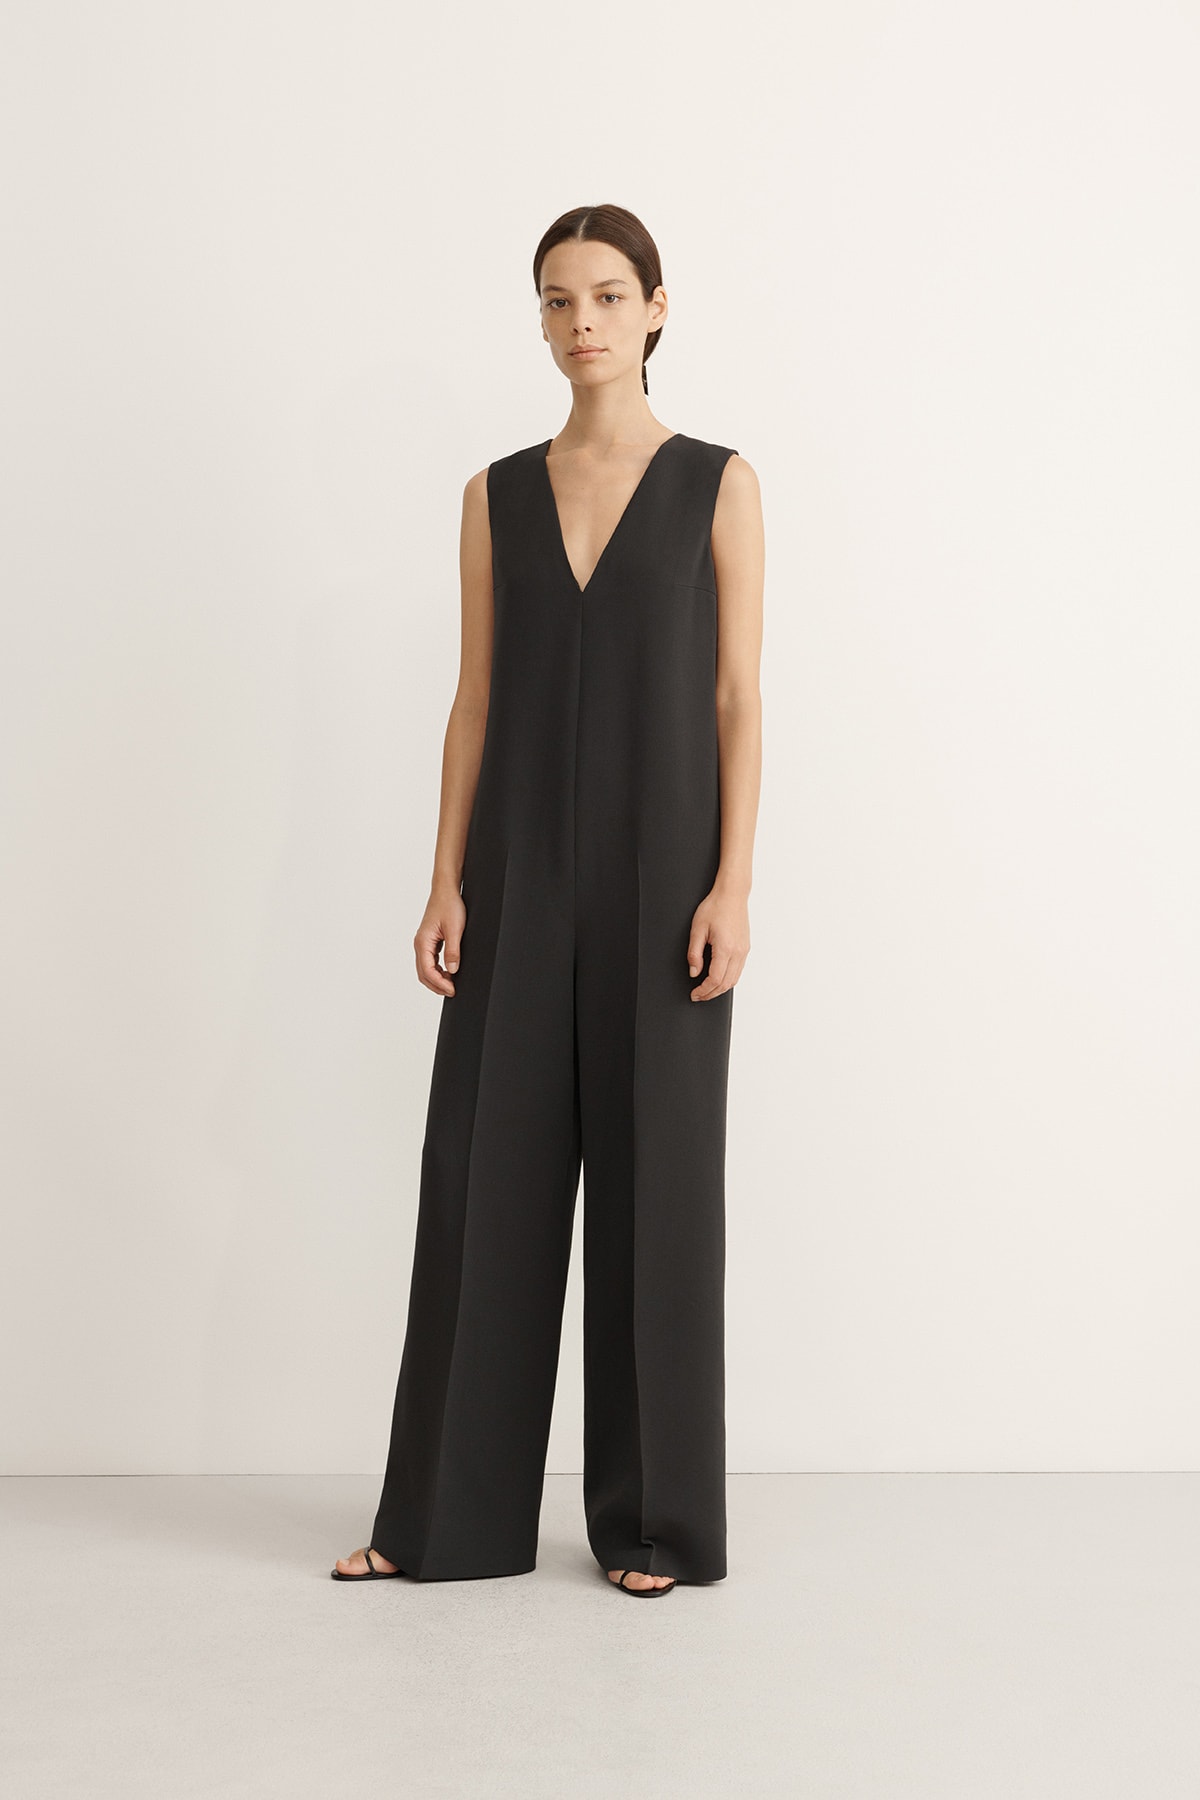 COS Spring Summer 2020 Collection Lookbook Wool Jumpsuit Charcoal